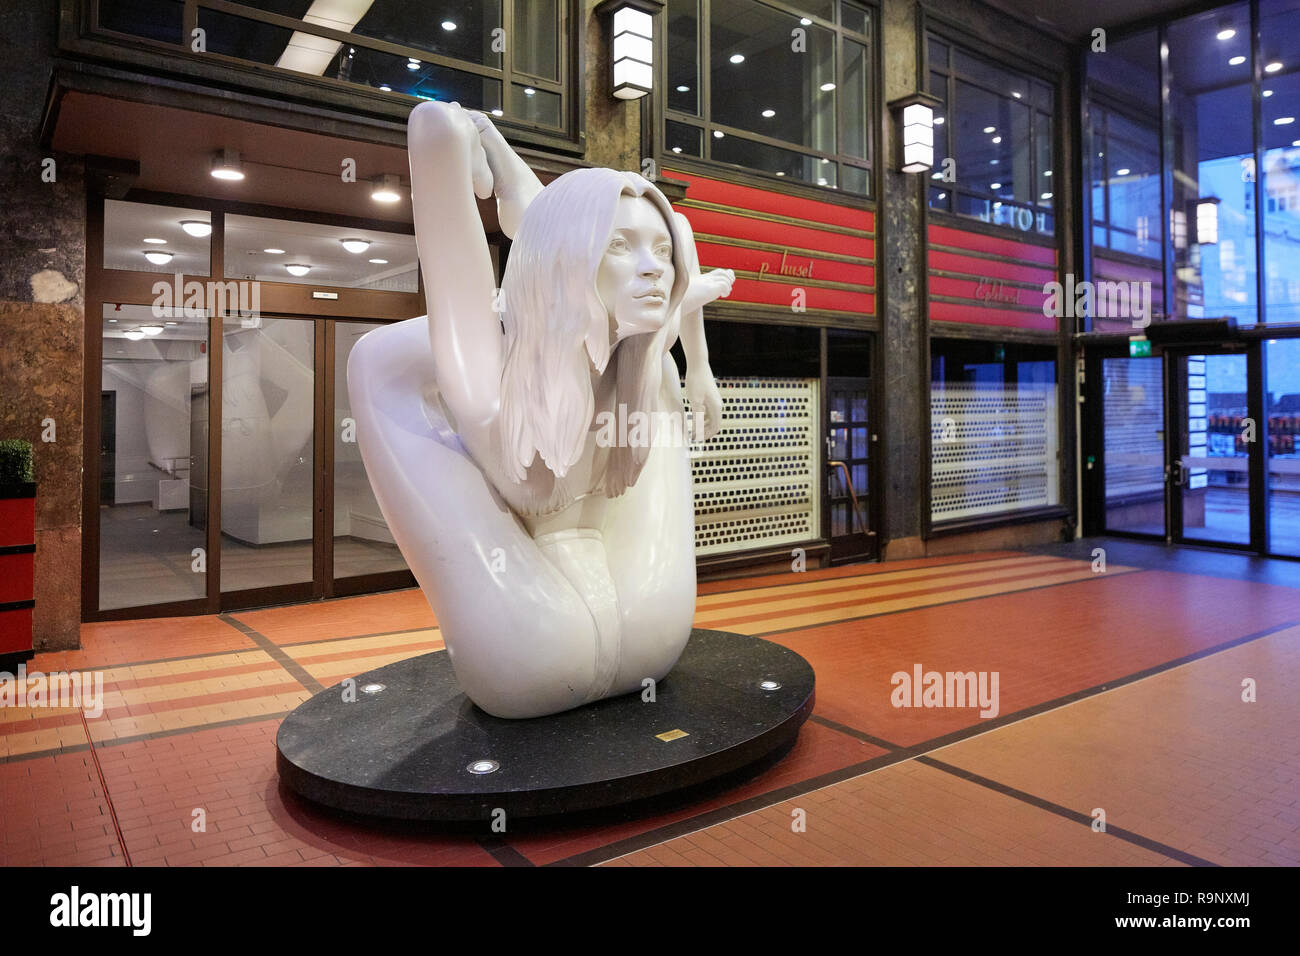 Sphinx sculpture depicting Kate Moss by artist Marc Quinn Folketeateret in Oslo, Norway Stock Photo